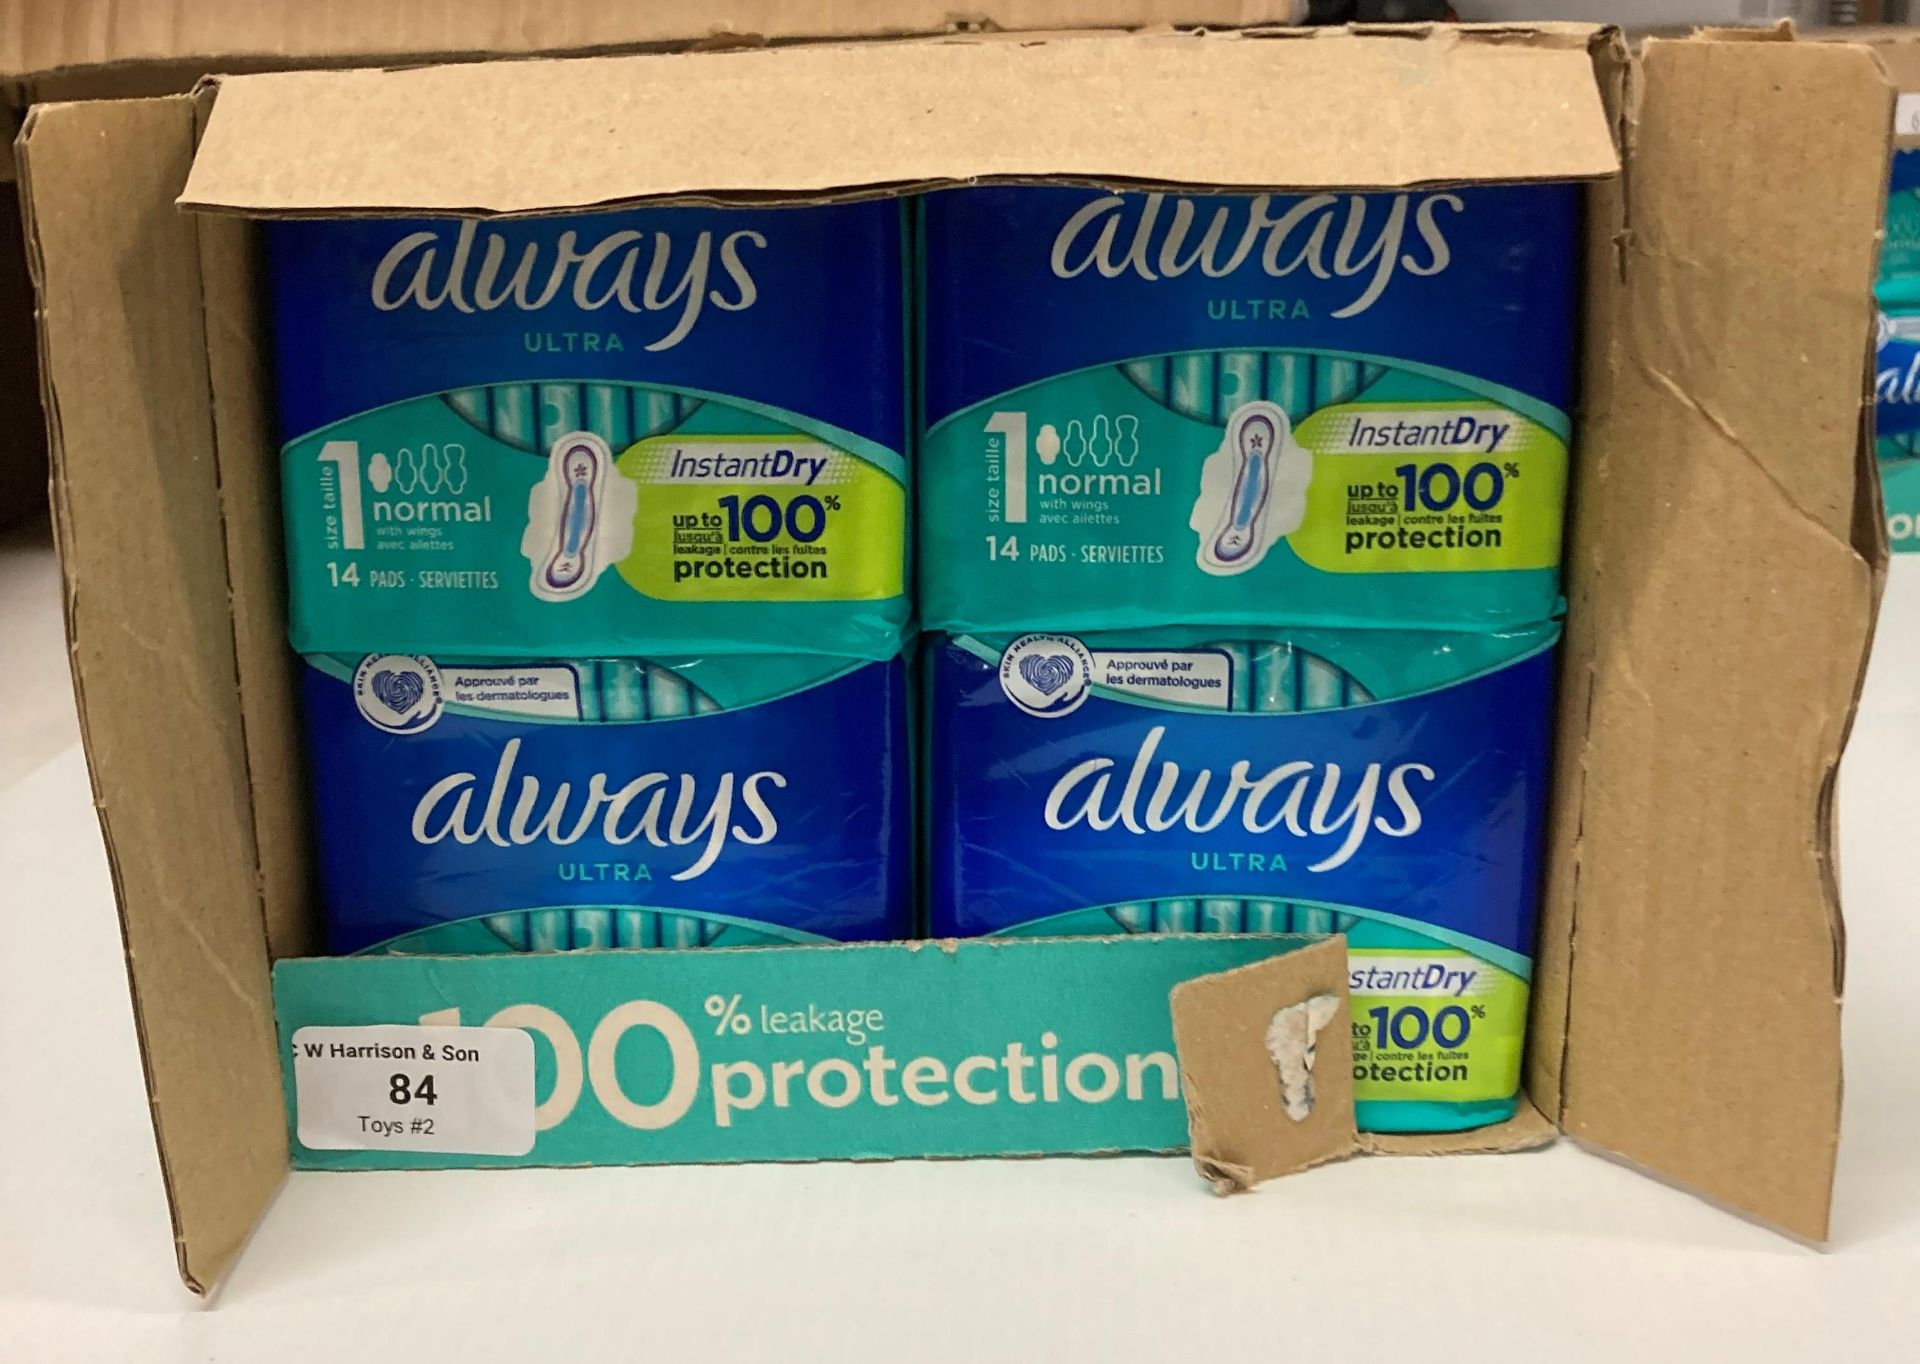 Contents to 2 boxes - 32 x packs of Always Ultra sanitary pads (size 1 - 14 per pack)) (saleroom - Image 3 of 3